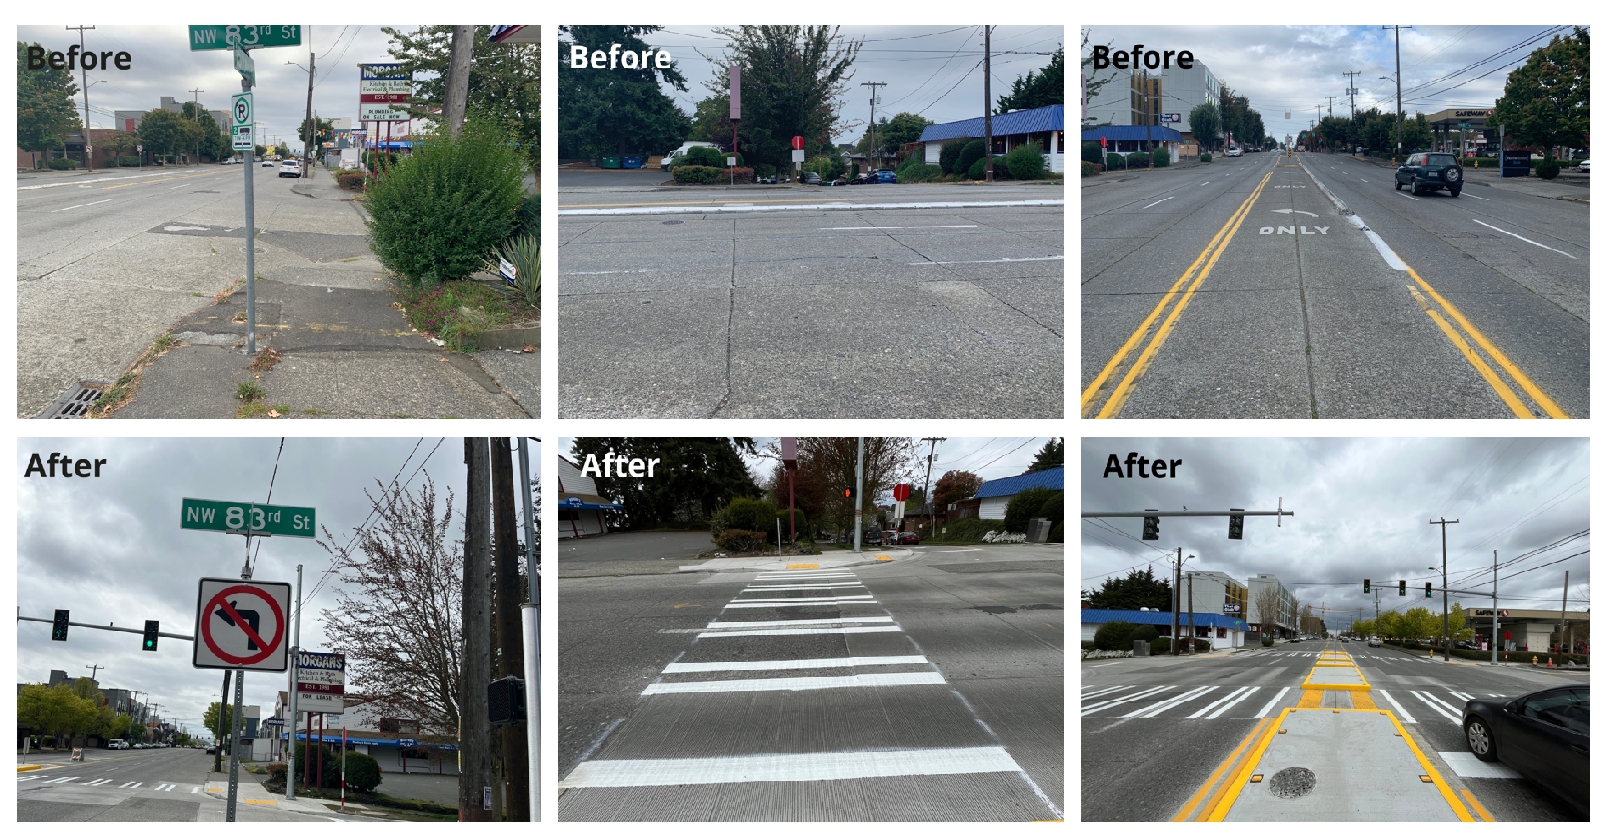 A series of before and after photos, the first shows a street sign that has been updated with a no left turn, the middle picture shows a new crosswalk, and the one on the right shows a new pedestrian island